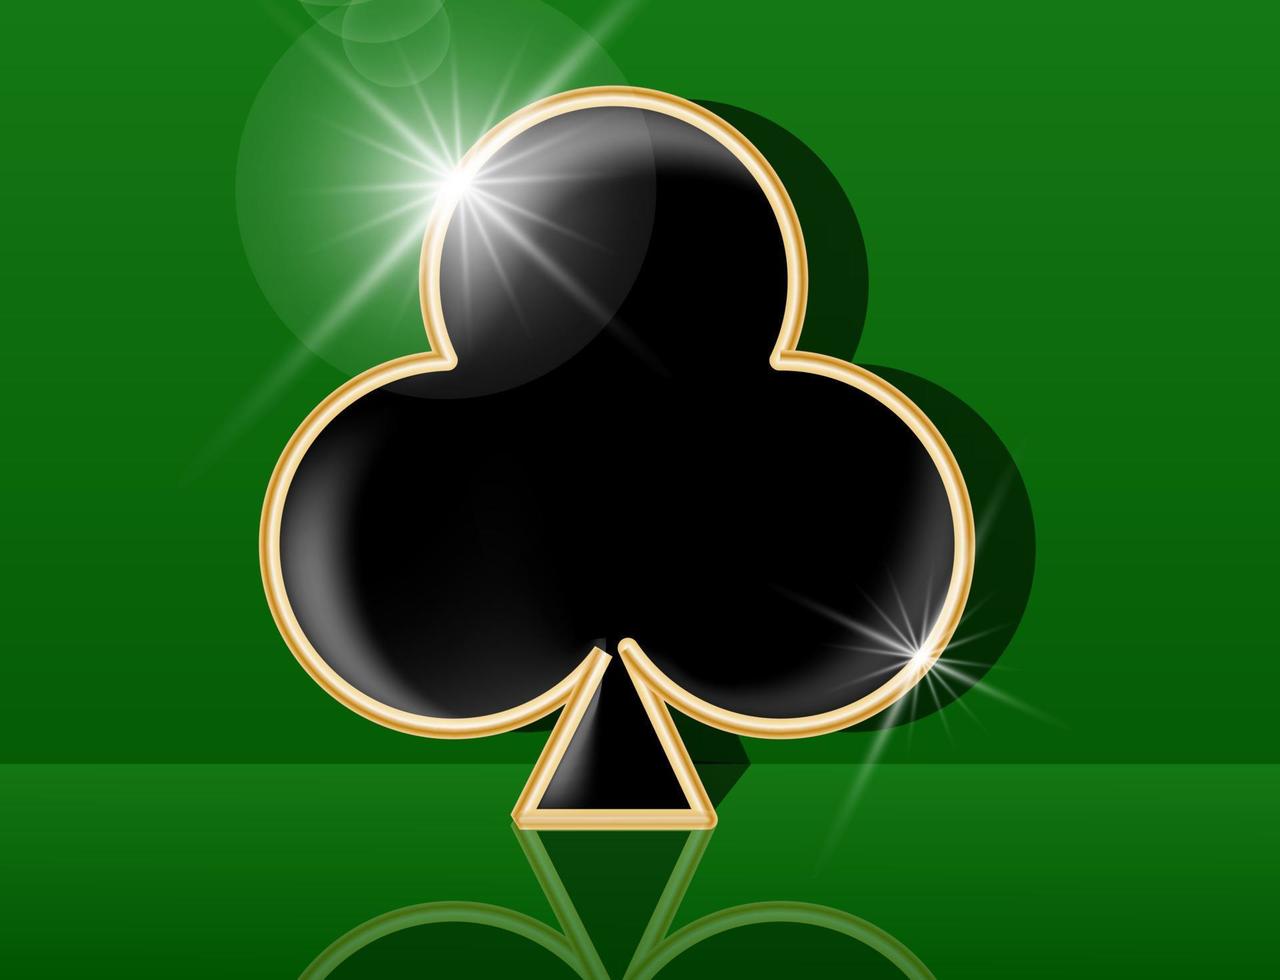 Card suit sign of clubs vector